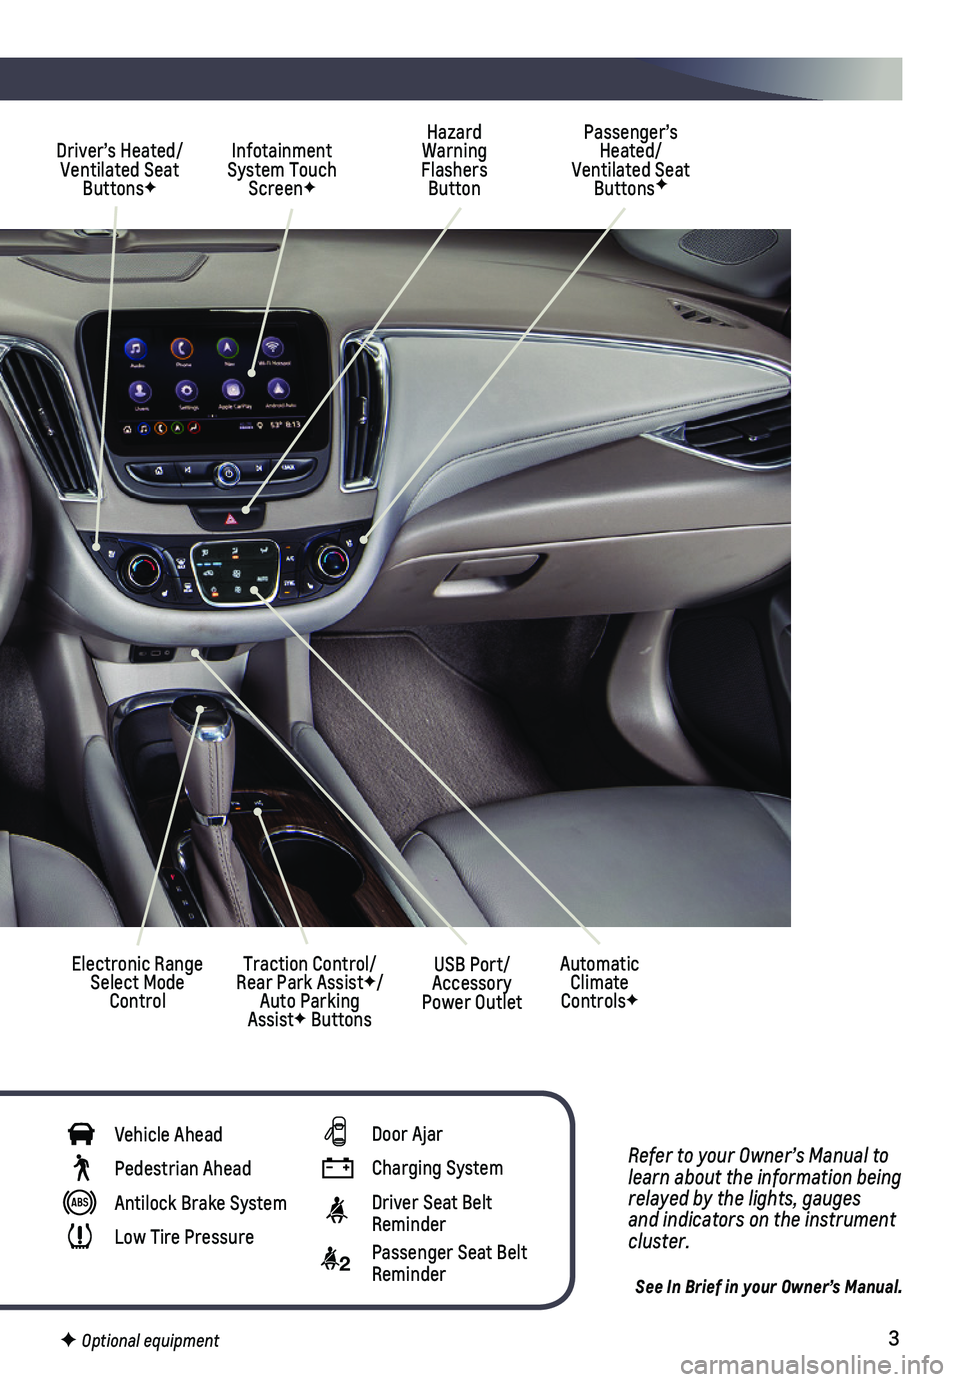 CHEVROLET MALIBU 2019  Get To Know Guide 3
Refer to your Owner’s Manual to learn about the information being relayed by the lights, gauges and indicators on the instrument cluster.
See In Brief in your Owner’s Manual.
Hazard Warning Flas